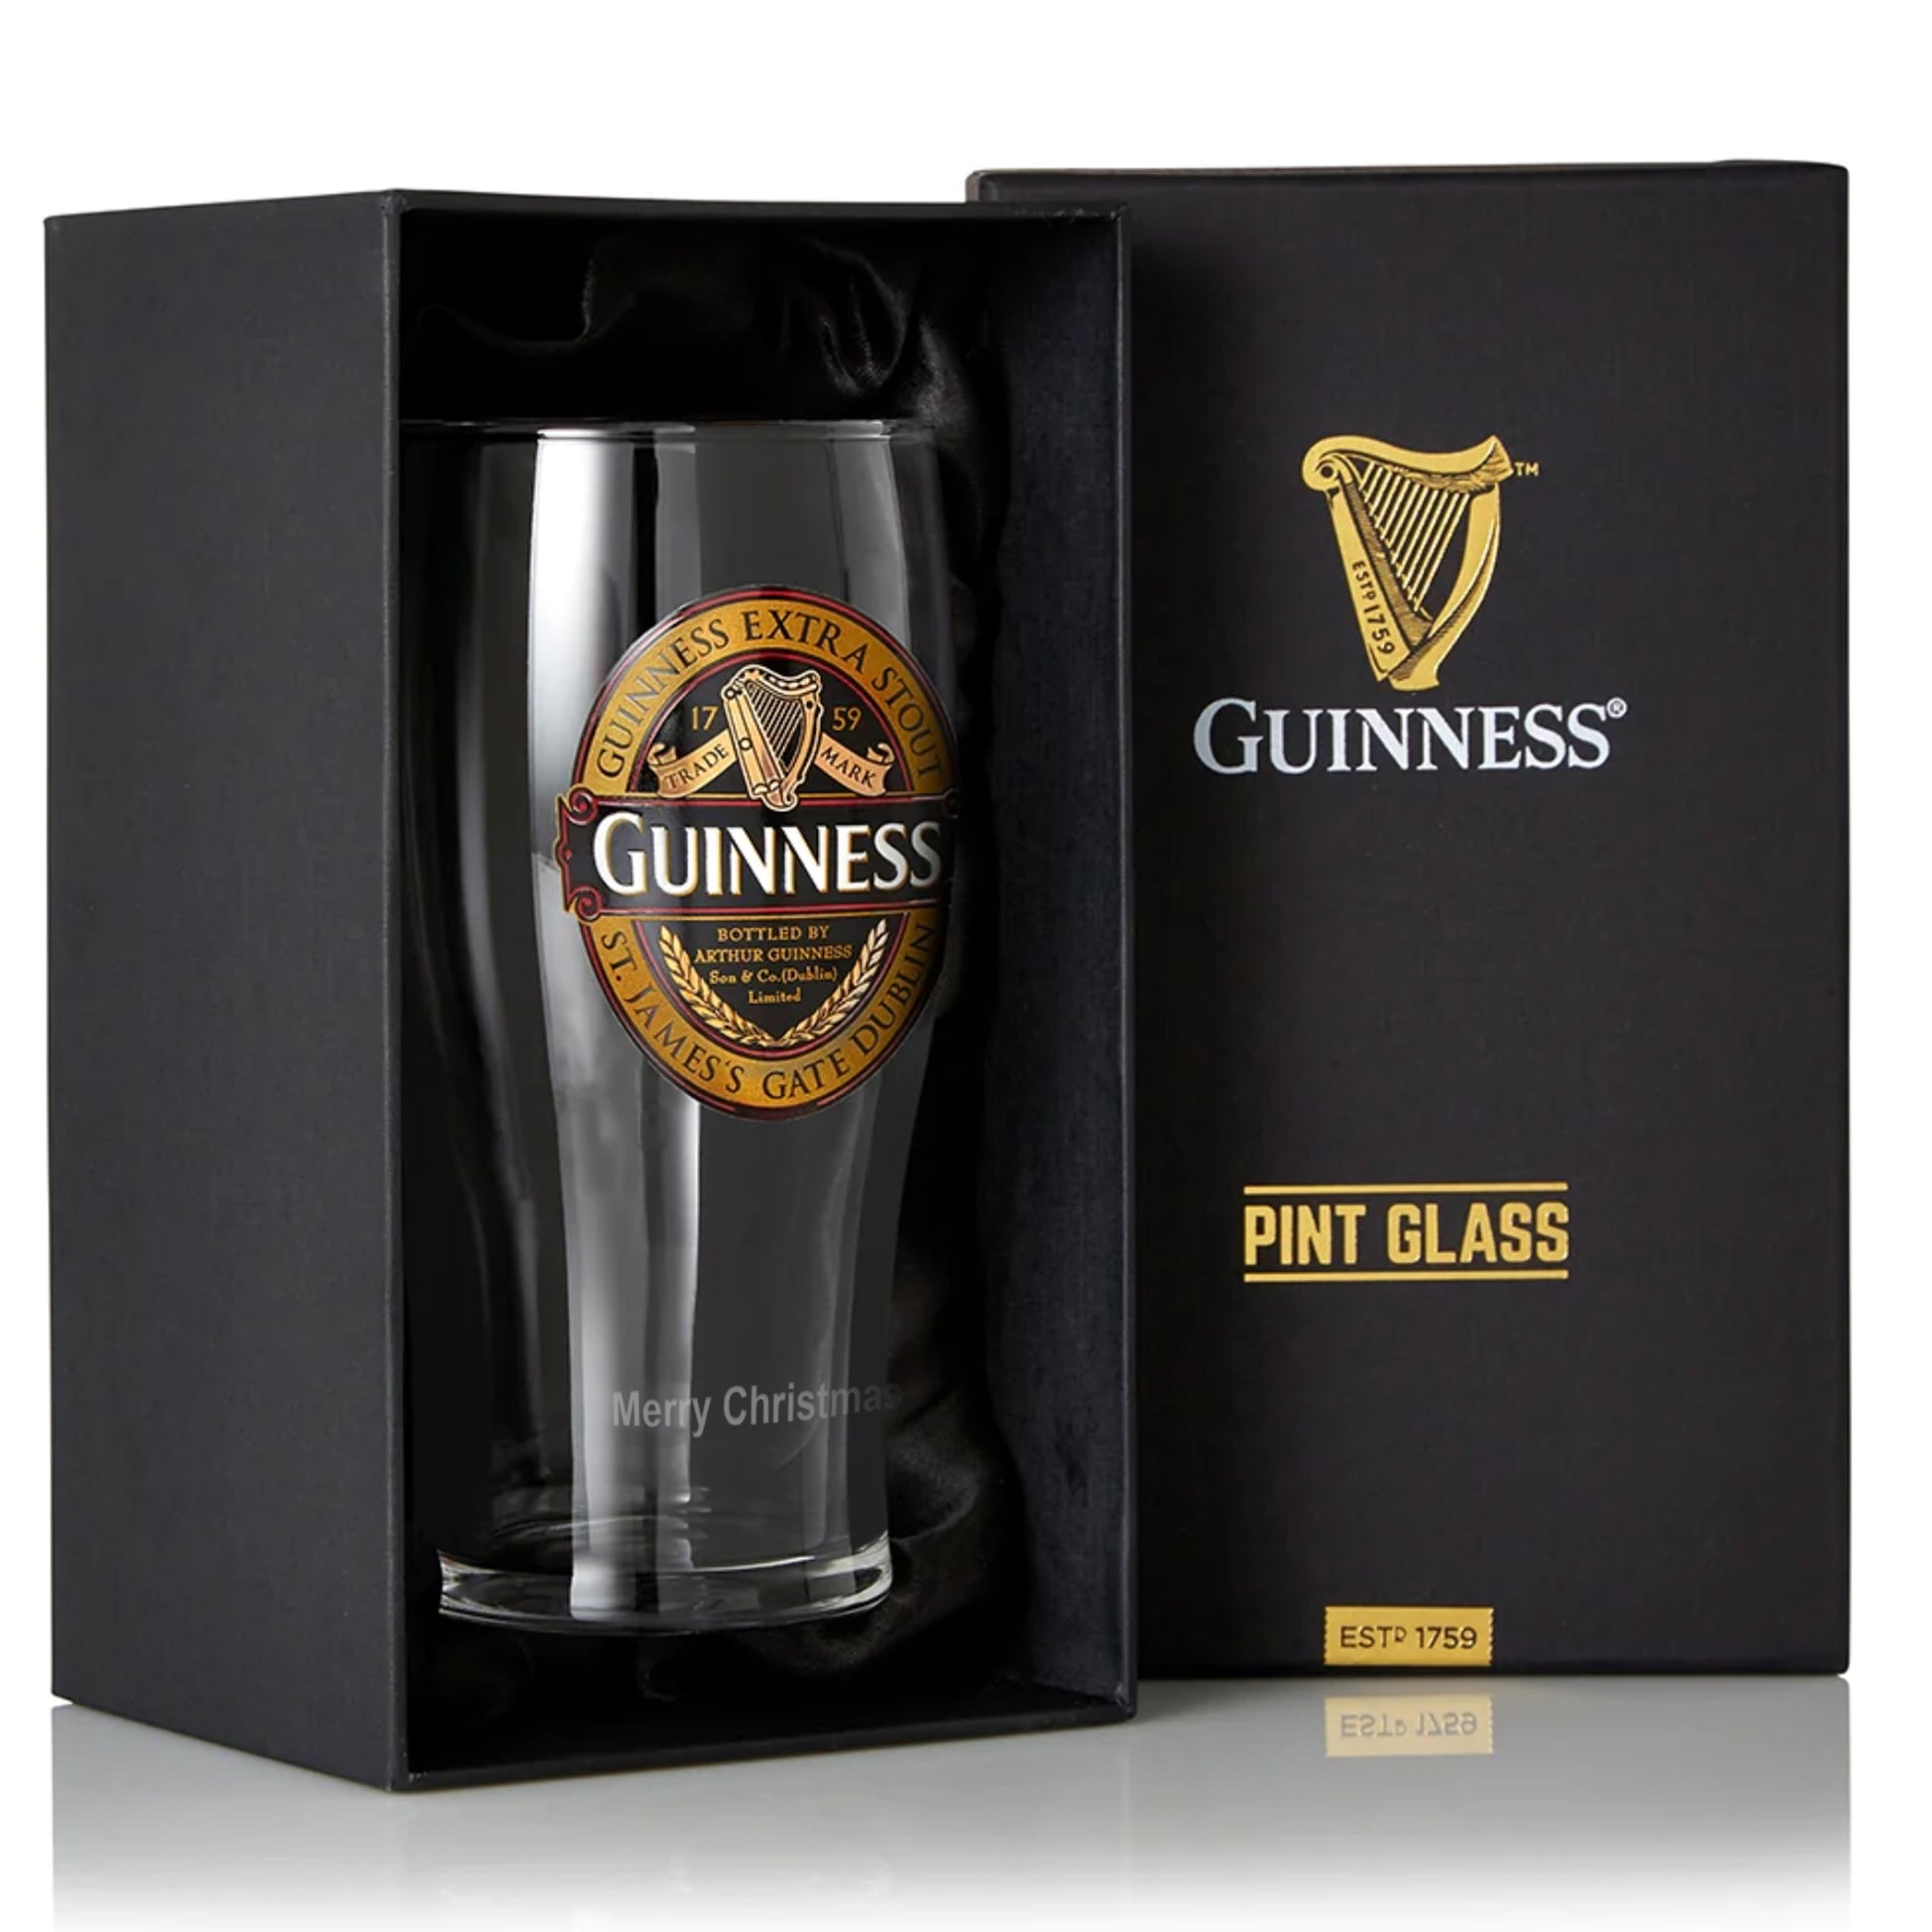 Guinness UK Guinness Classic Collection Pint Glass in a box featuring the iconic Extra Stout Label.